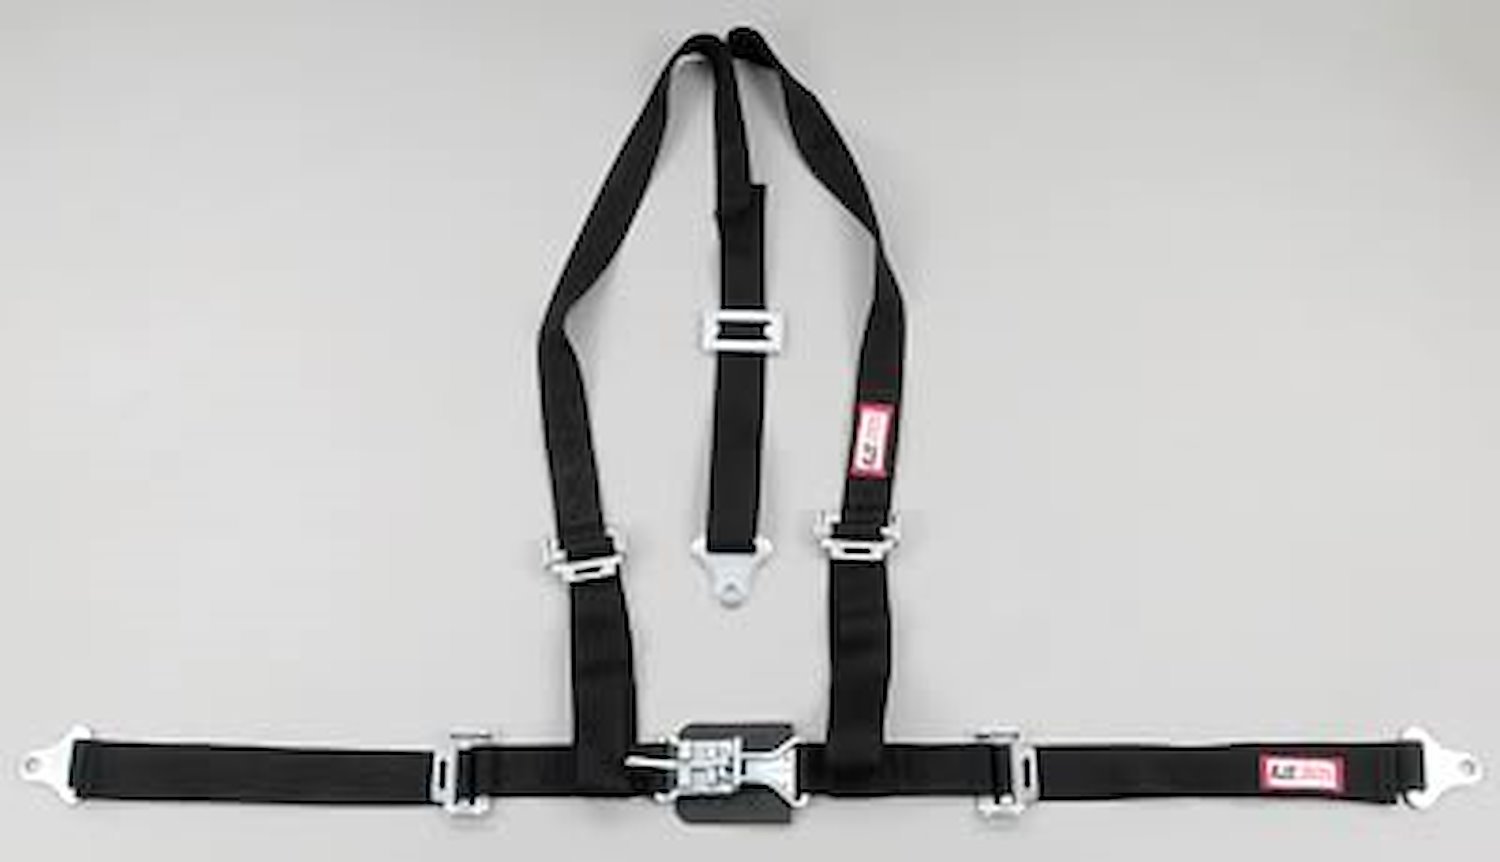 NON-SFI L&L HARNESS 3 PULL UP Lap BELT SNAP SEWN IN 2 S.H. Y FLOOR Mount w/STERNUM STRAP WRAP/BOLT HOT PINK